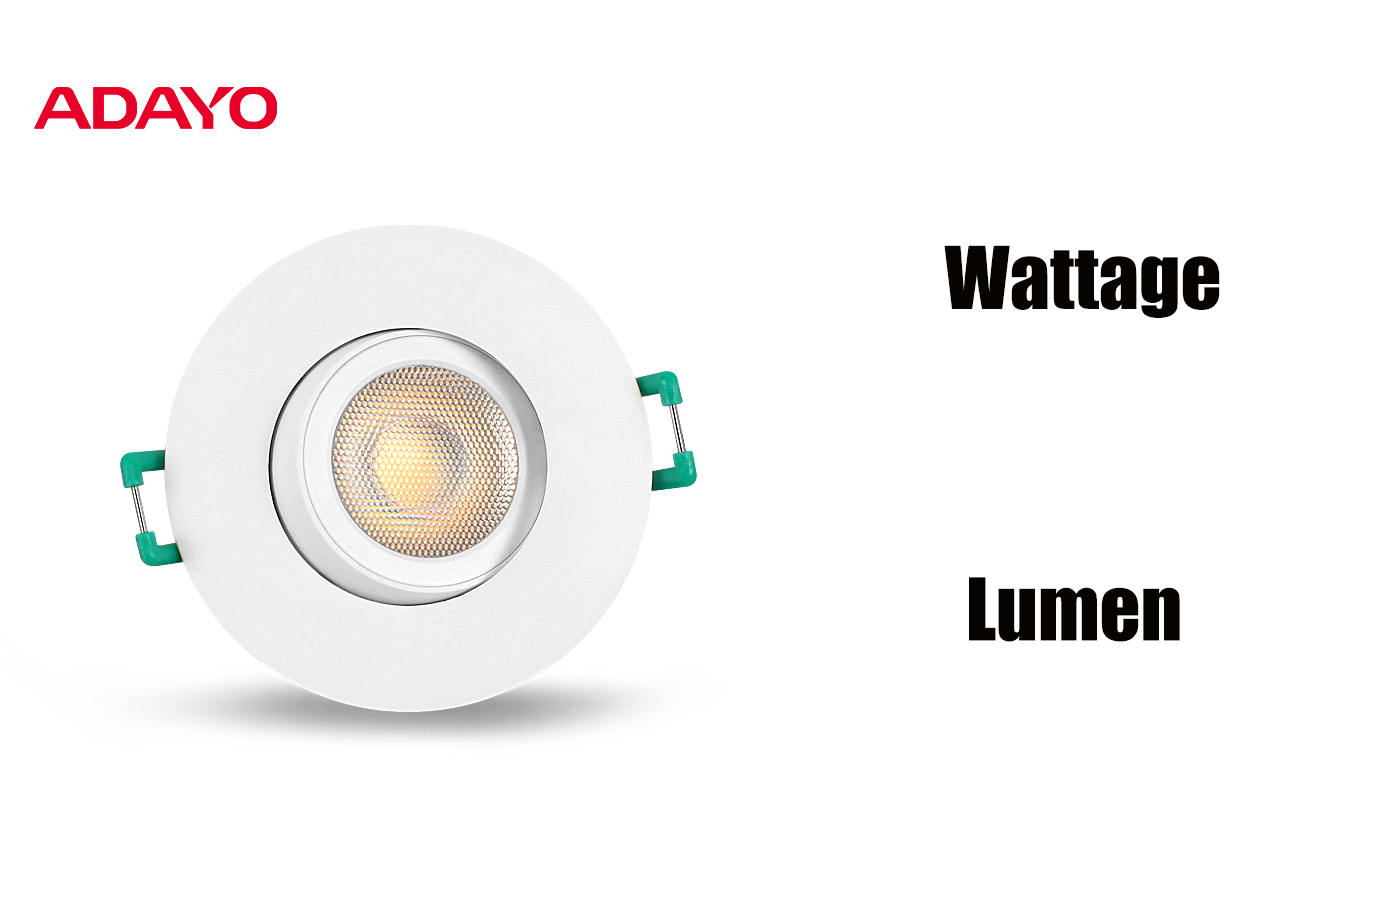 Why lumen are more important than wattage for led light?